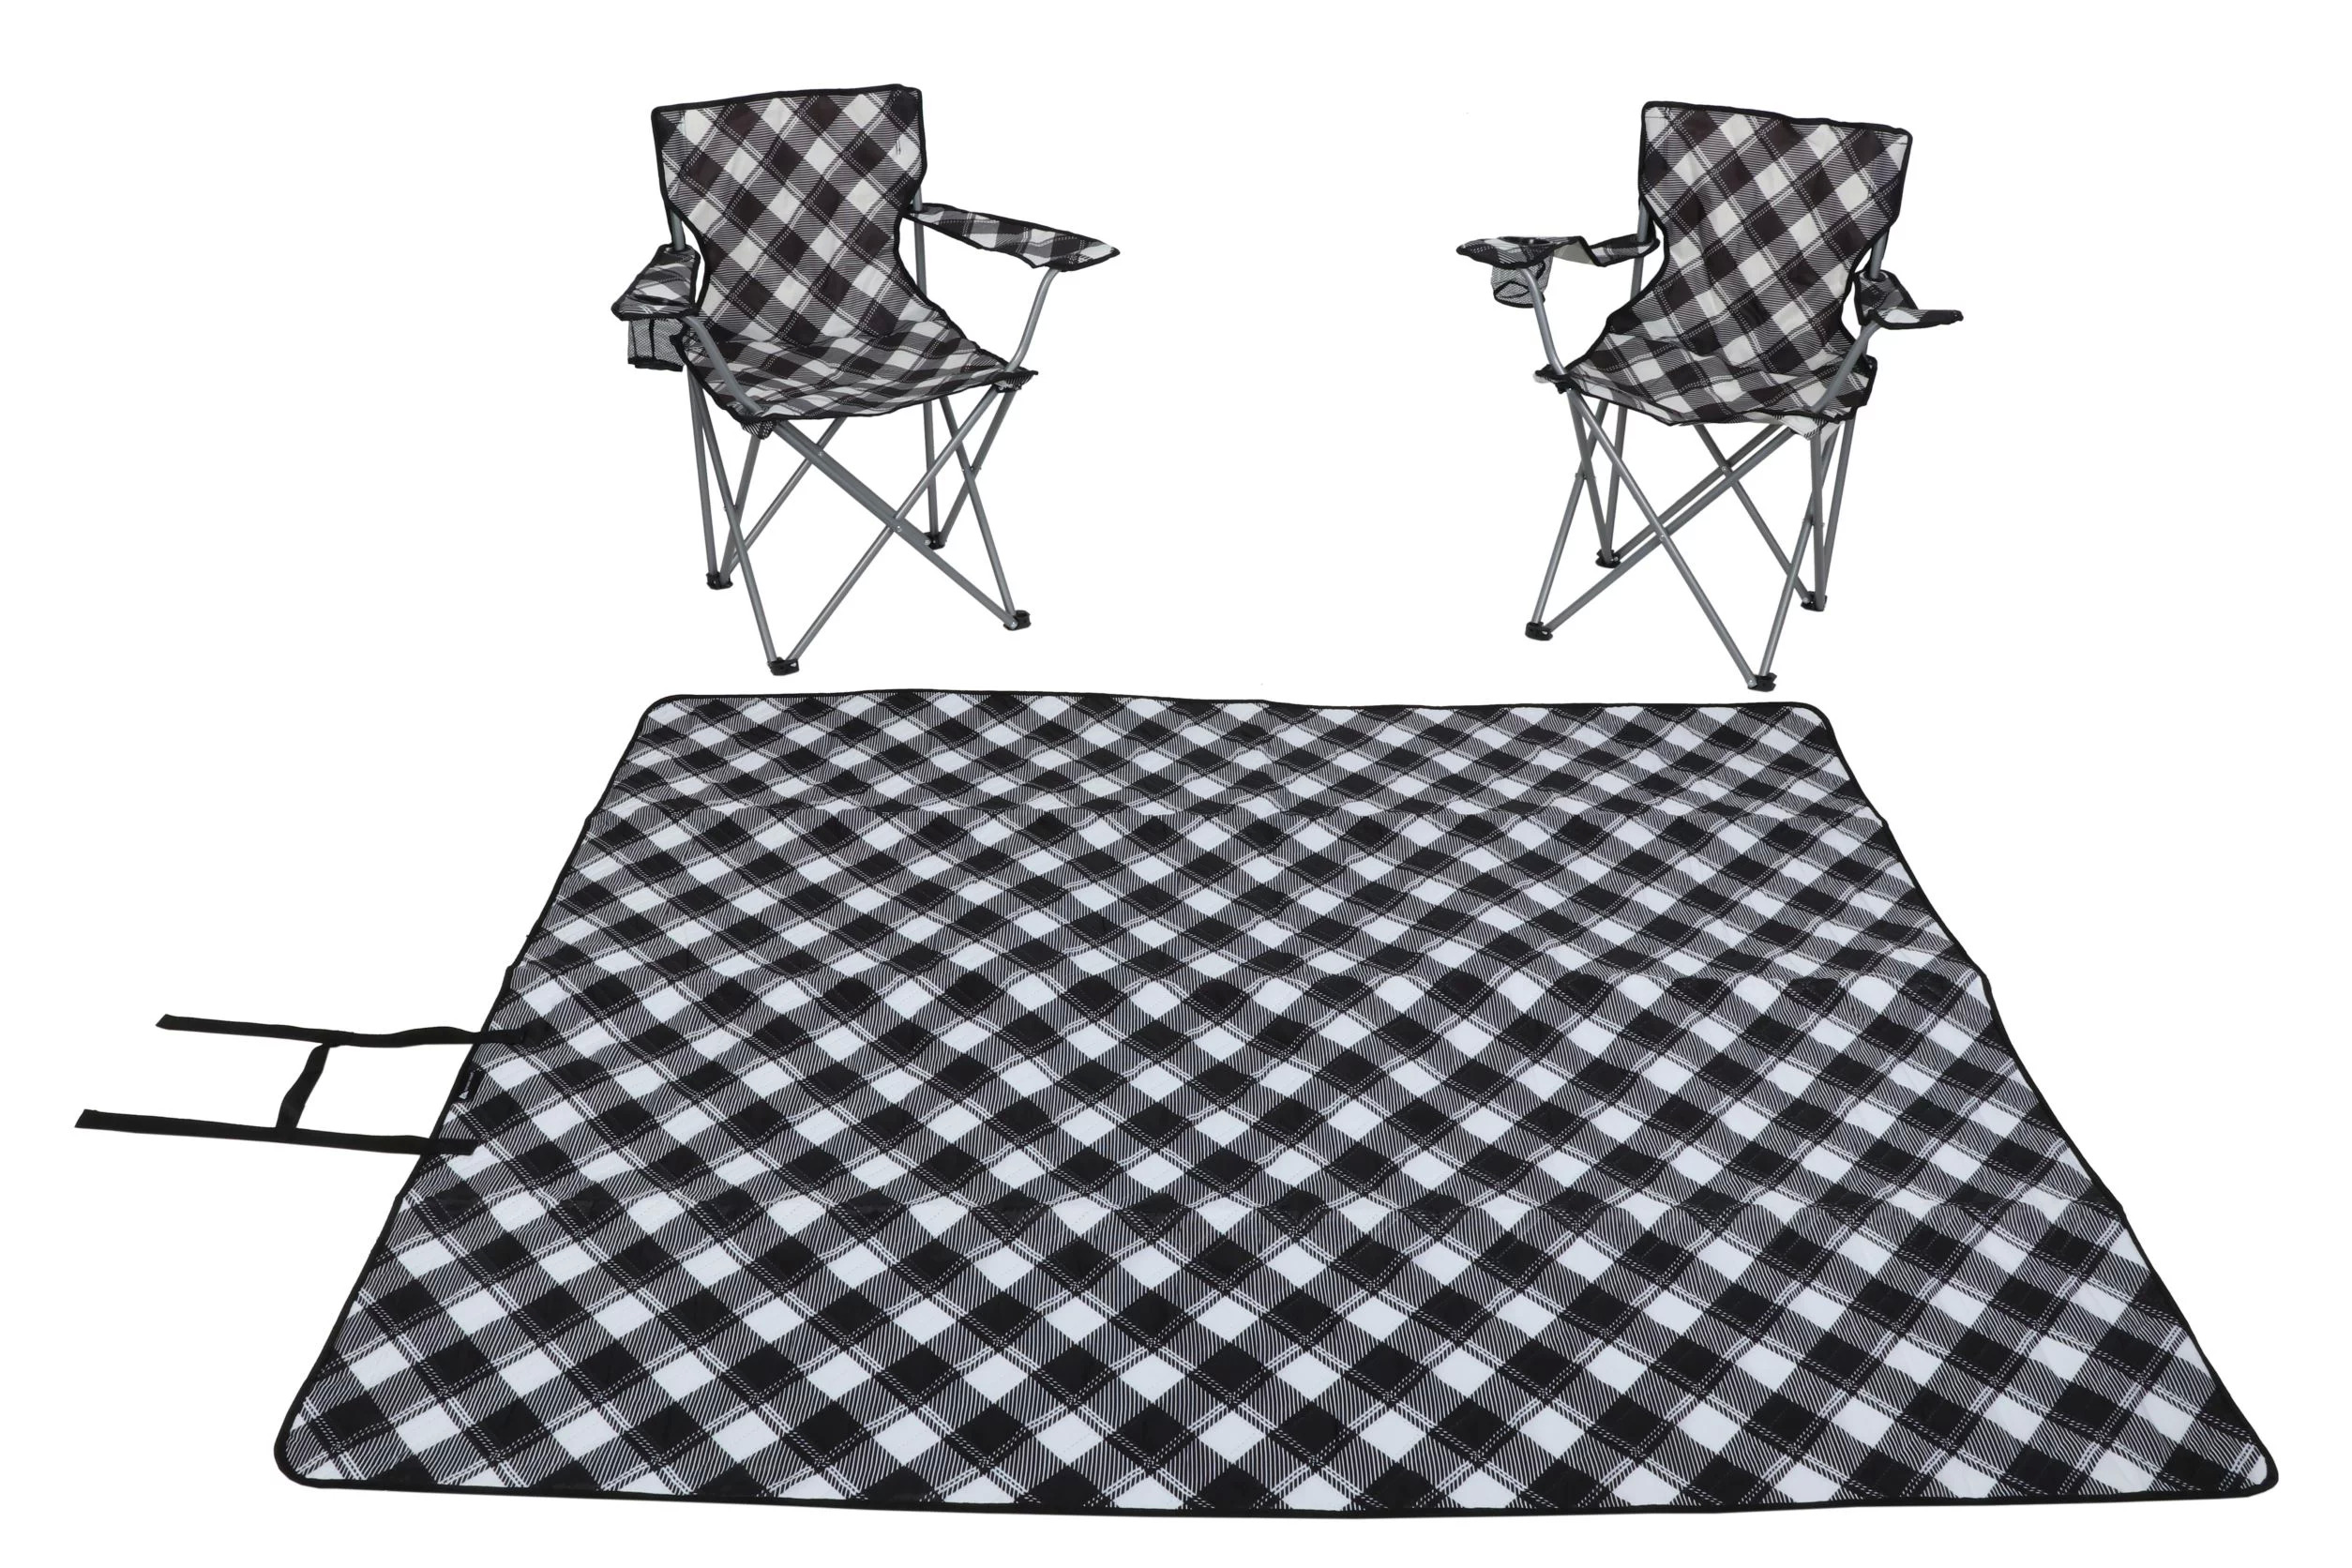 3-Pc Ozark Trail Camping Chairs & Blanket Set (2 Chairs + 1 Blanket, Red or Black) $20 + FS w/ Walmart+ or $35+